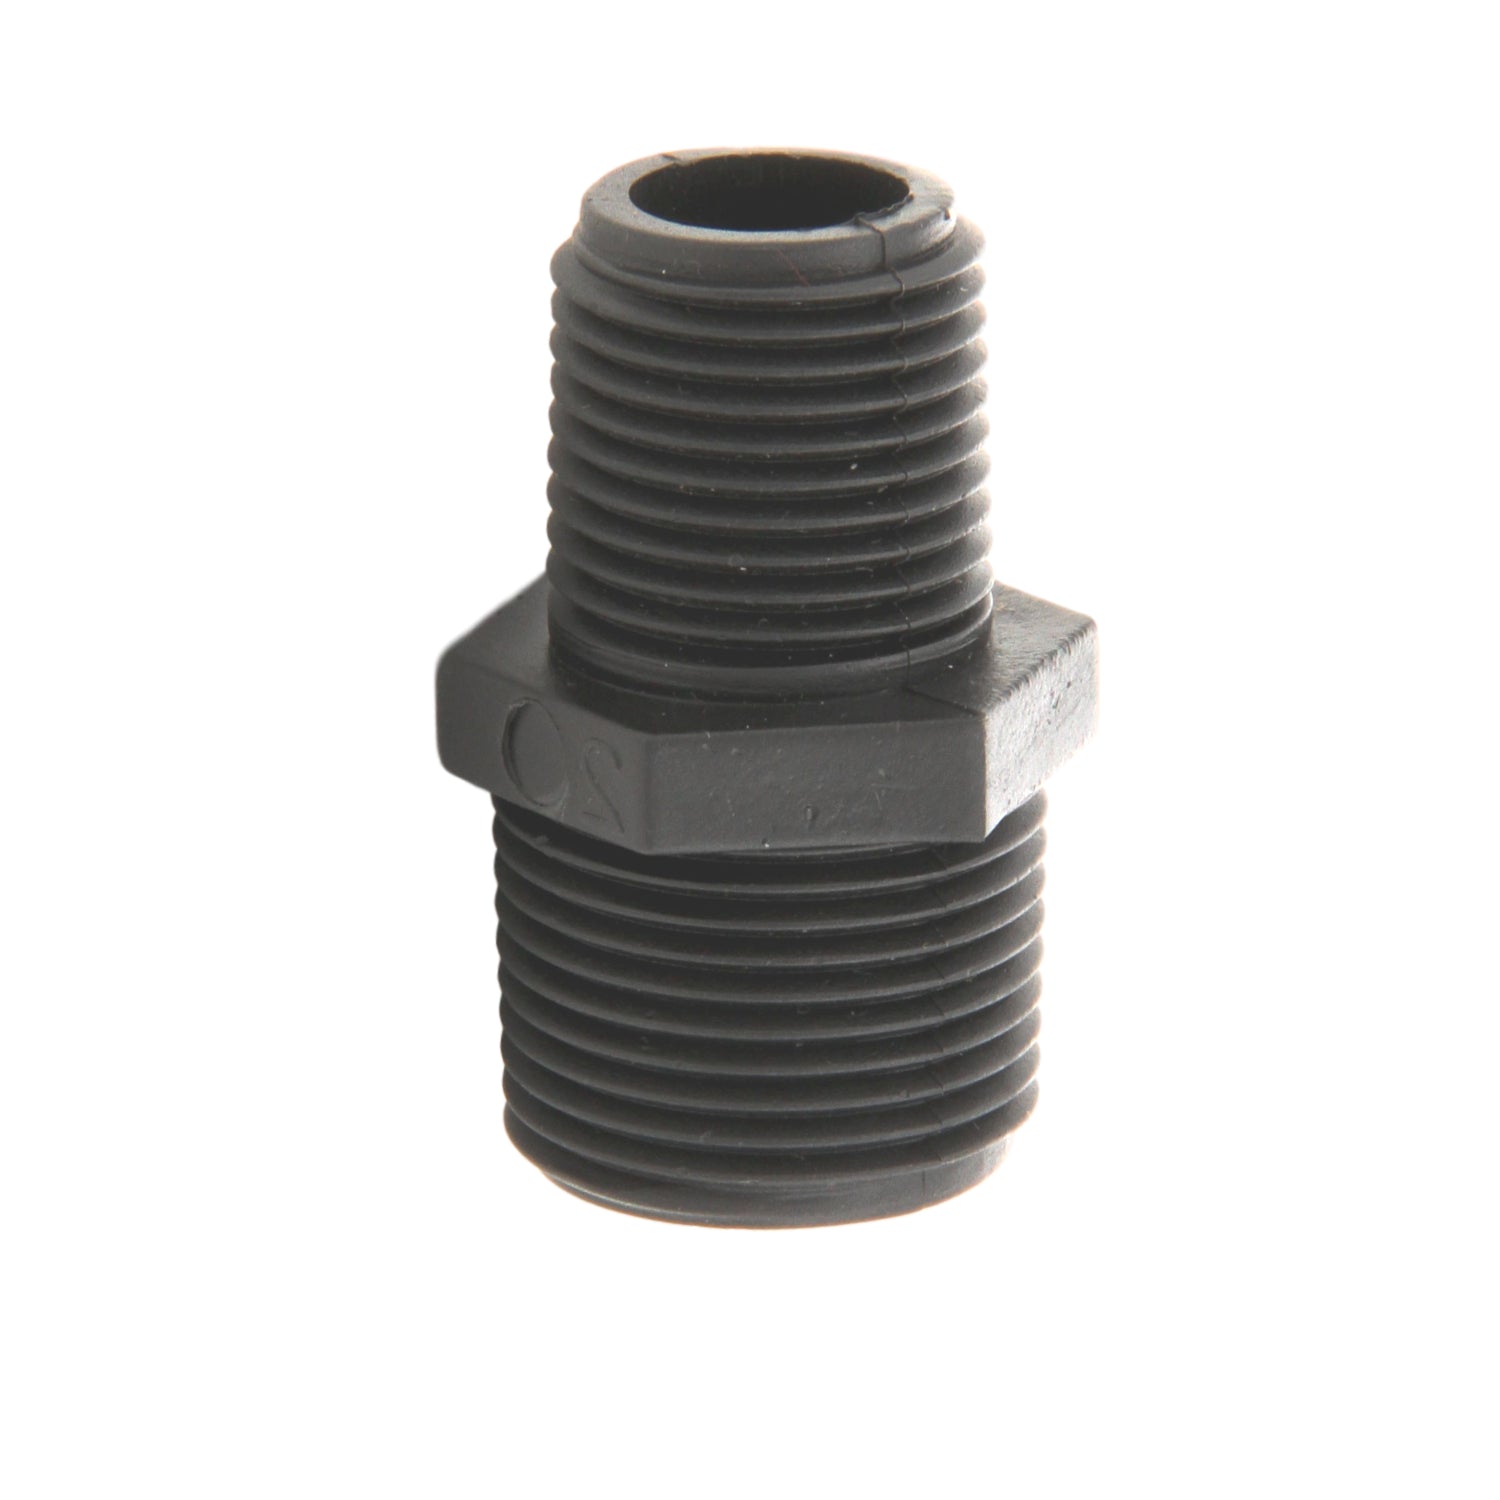 Male Reducing Adapter - HMRA1/2X3/4 - Nipple 1/2" X 3/4" Threaded Both Ends